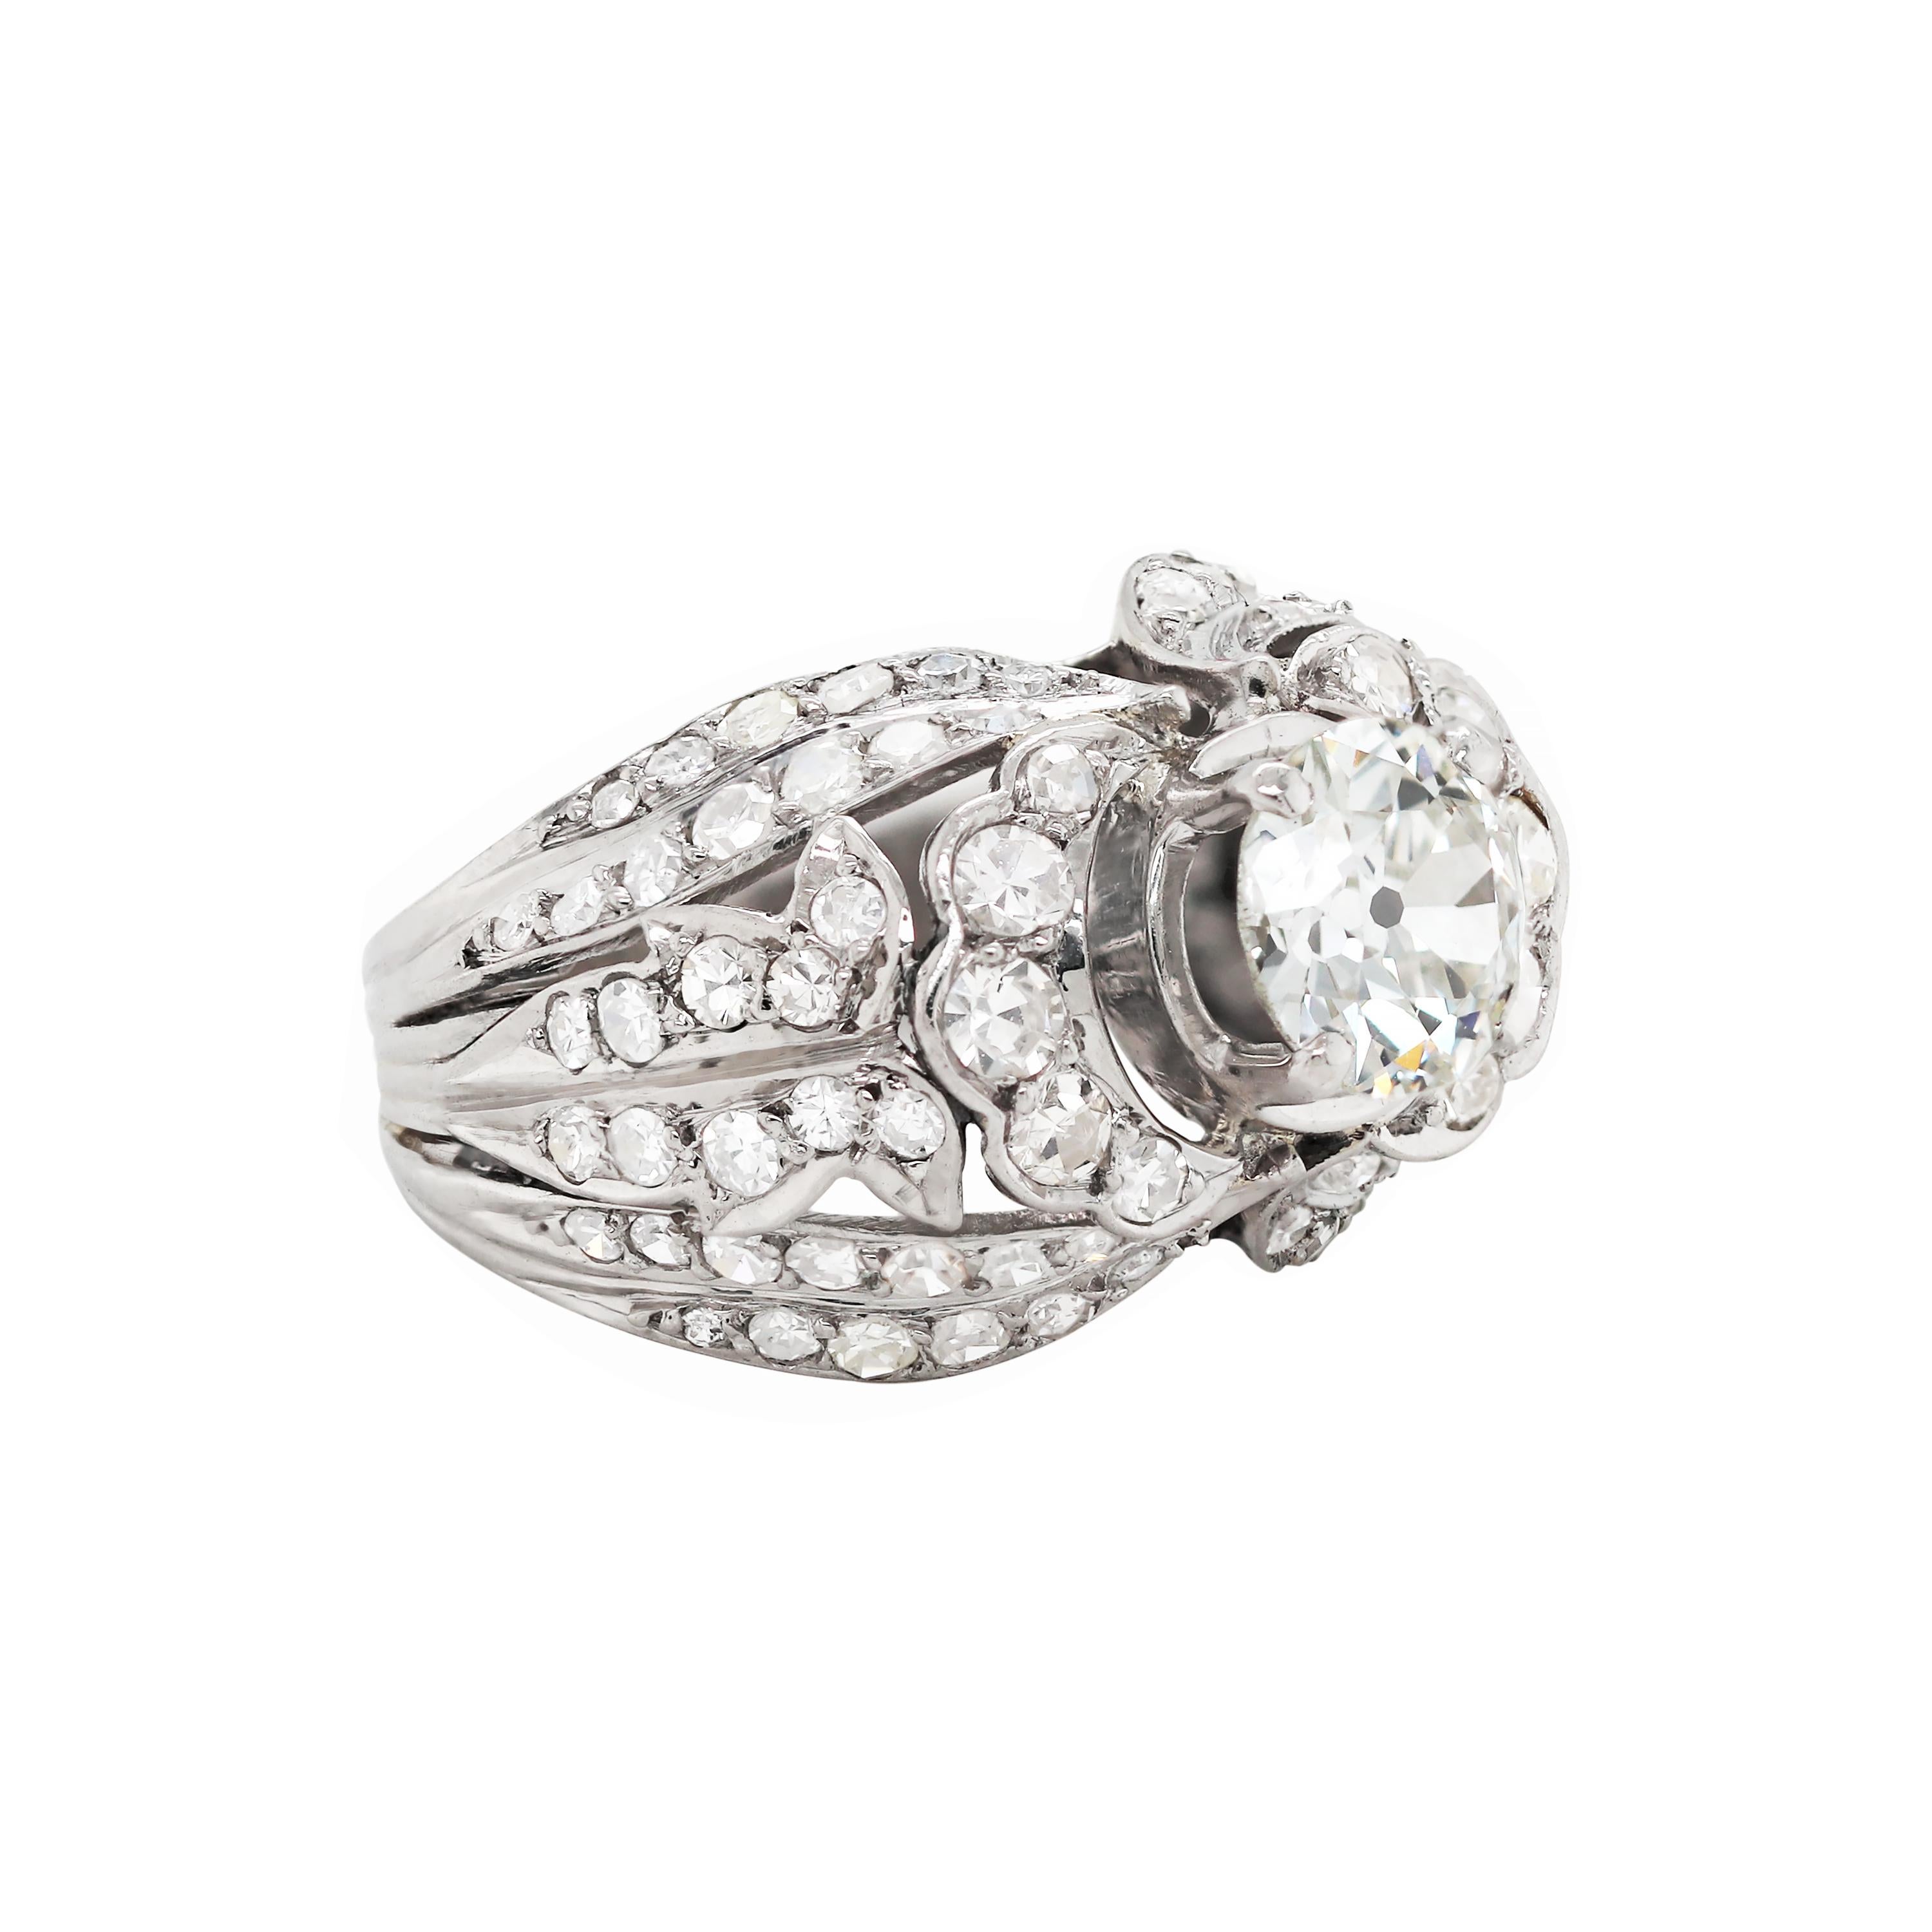 This exceptional handmade dome dress ring features a beautiful old cut diamond claw set in the center weighing 1.42ct. The ring is beautifully made with a grain set open work design mounted with 48 eight cut diamonds on either side, weighing a total